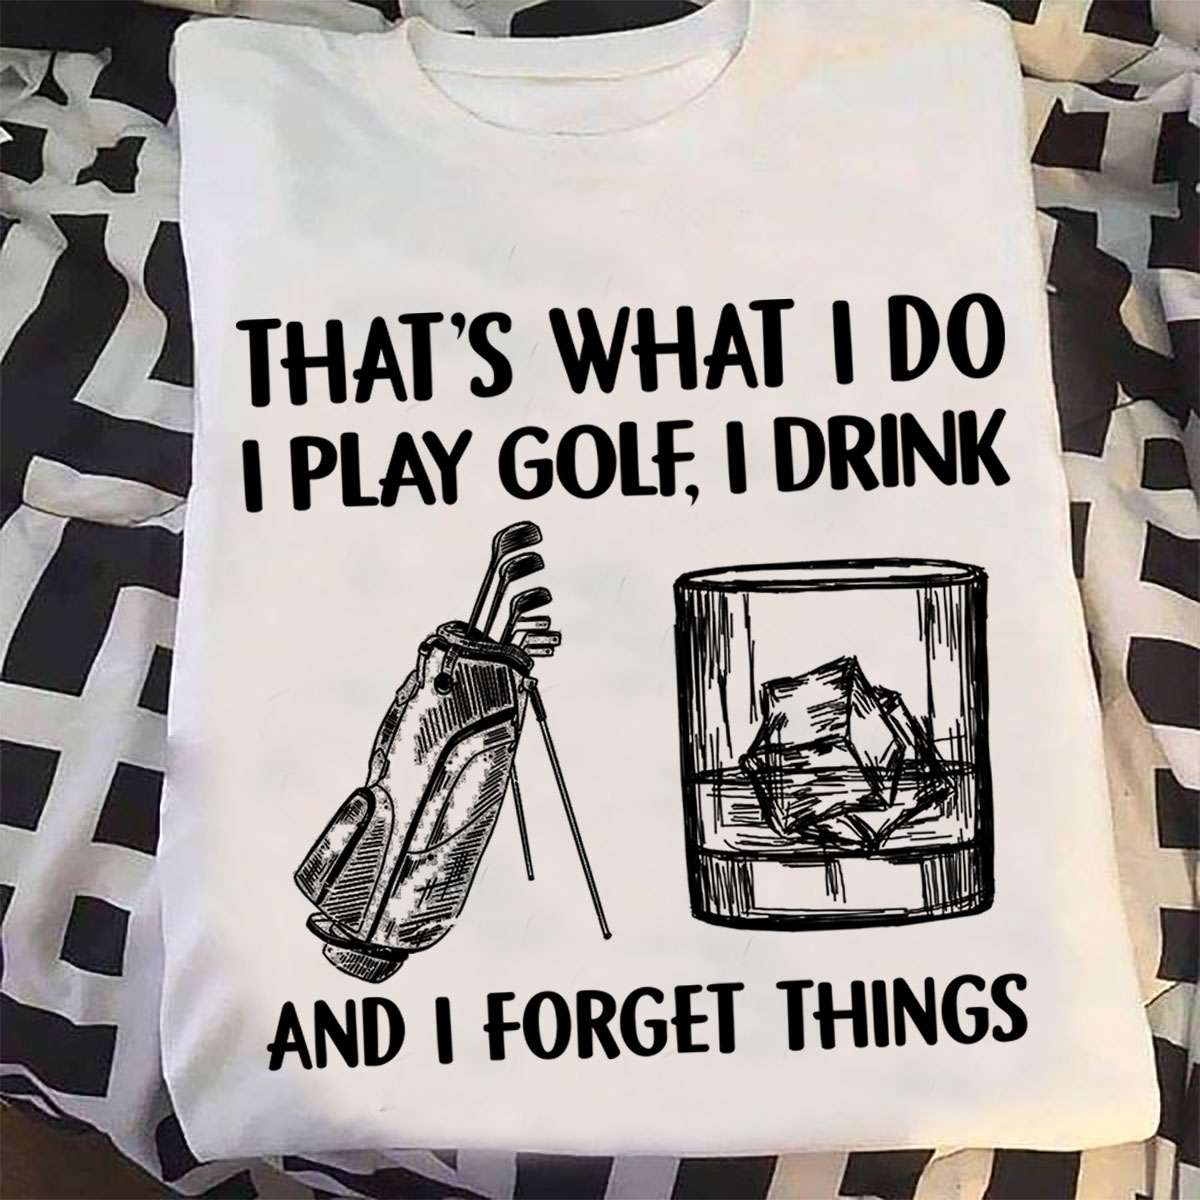 That's what I do I play golf, I drink and I forget things - Golf and wine